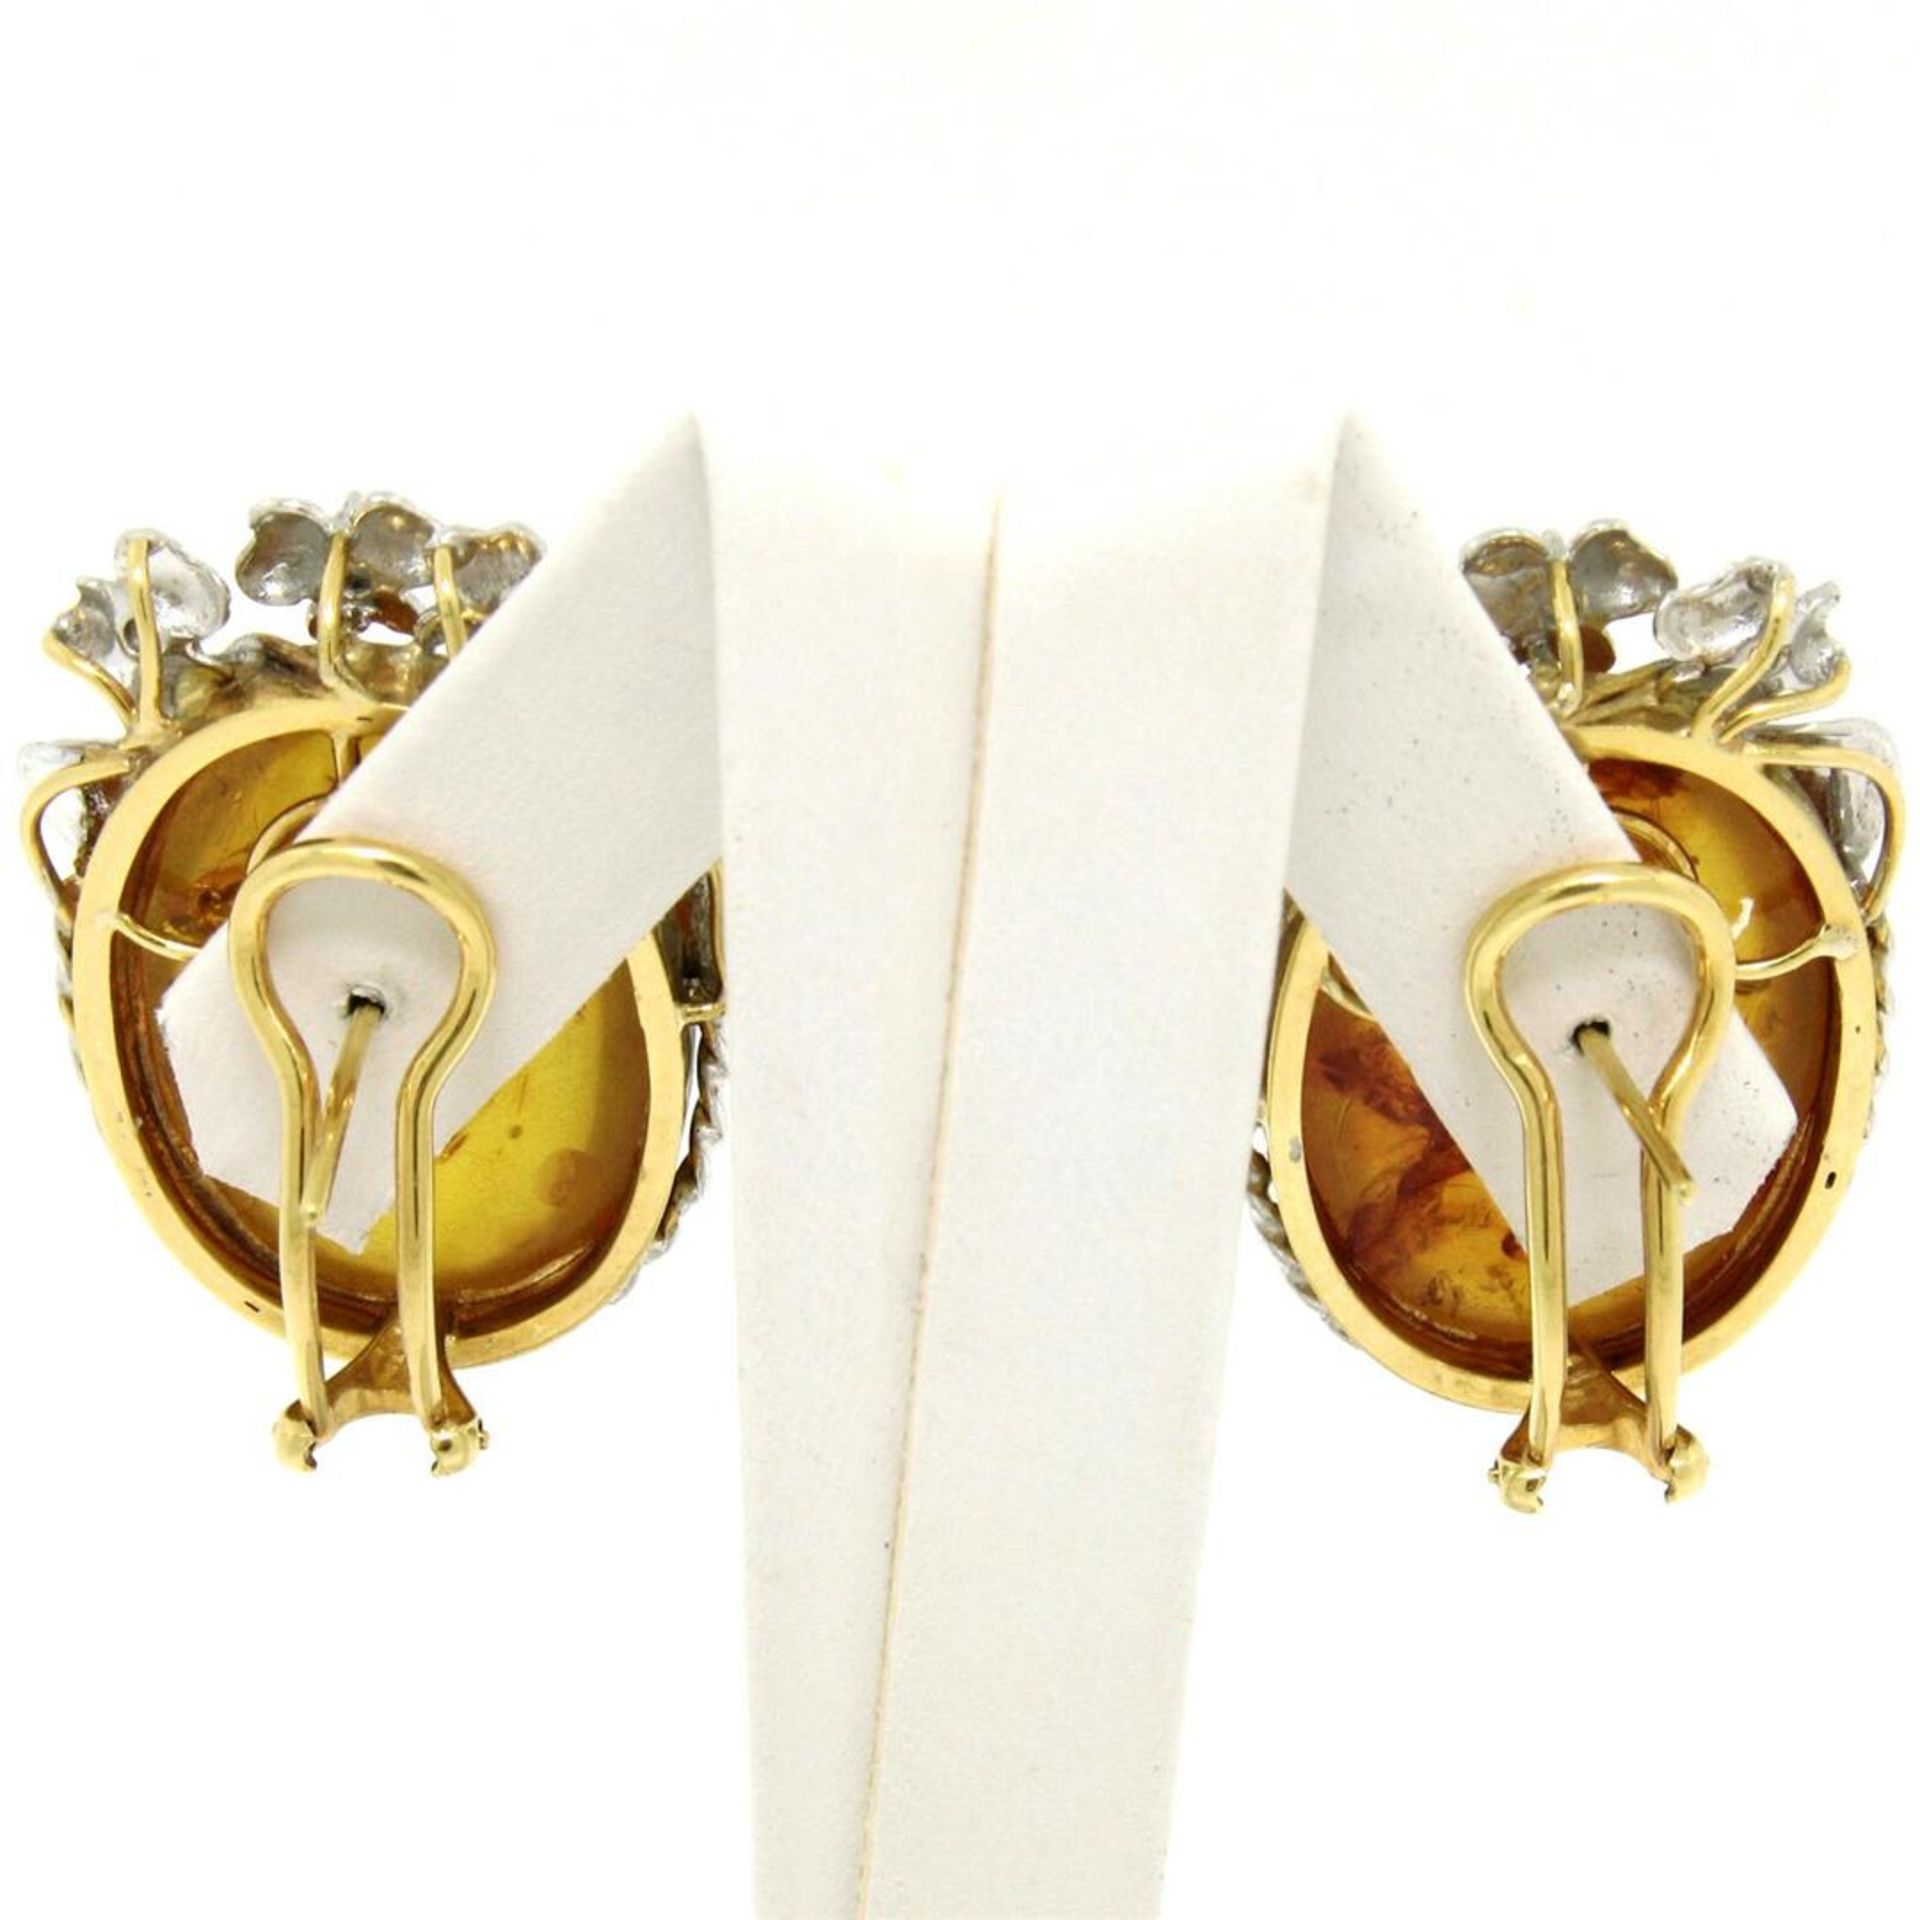 Vintage 18k White Gold Large Oval Amber Diamond Omega Earrings w/ Flower Etching - Image 4 of 6